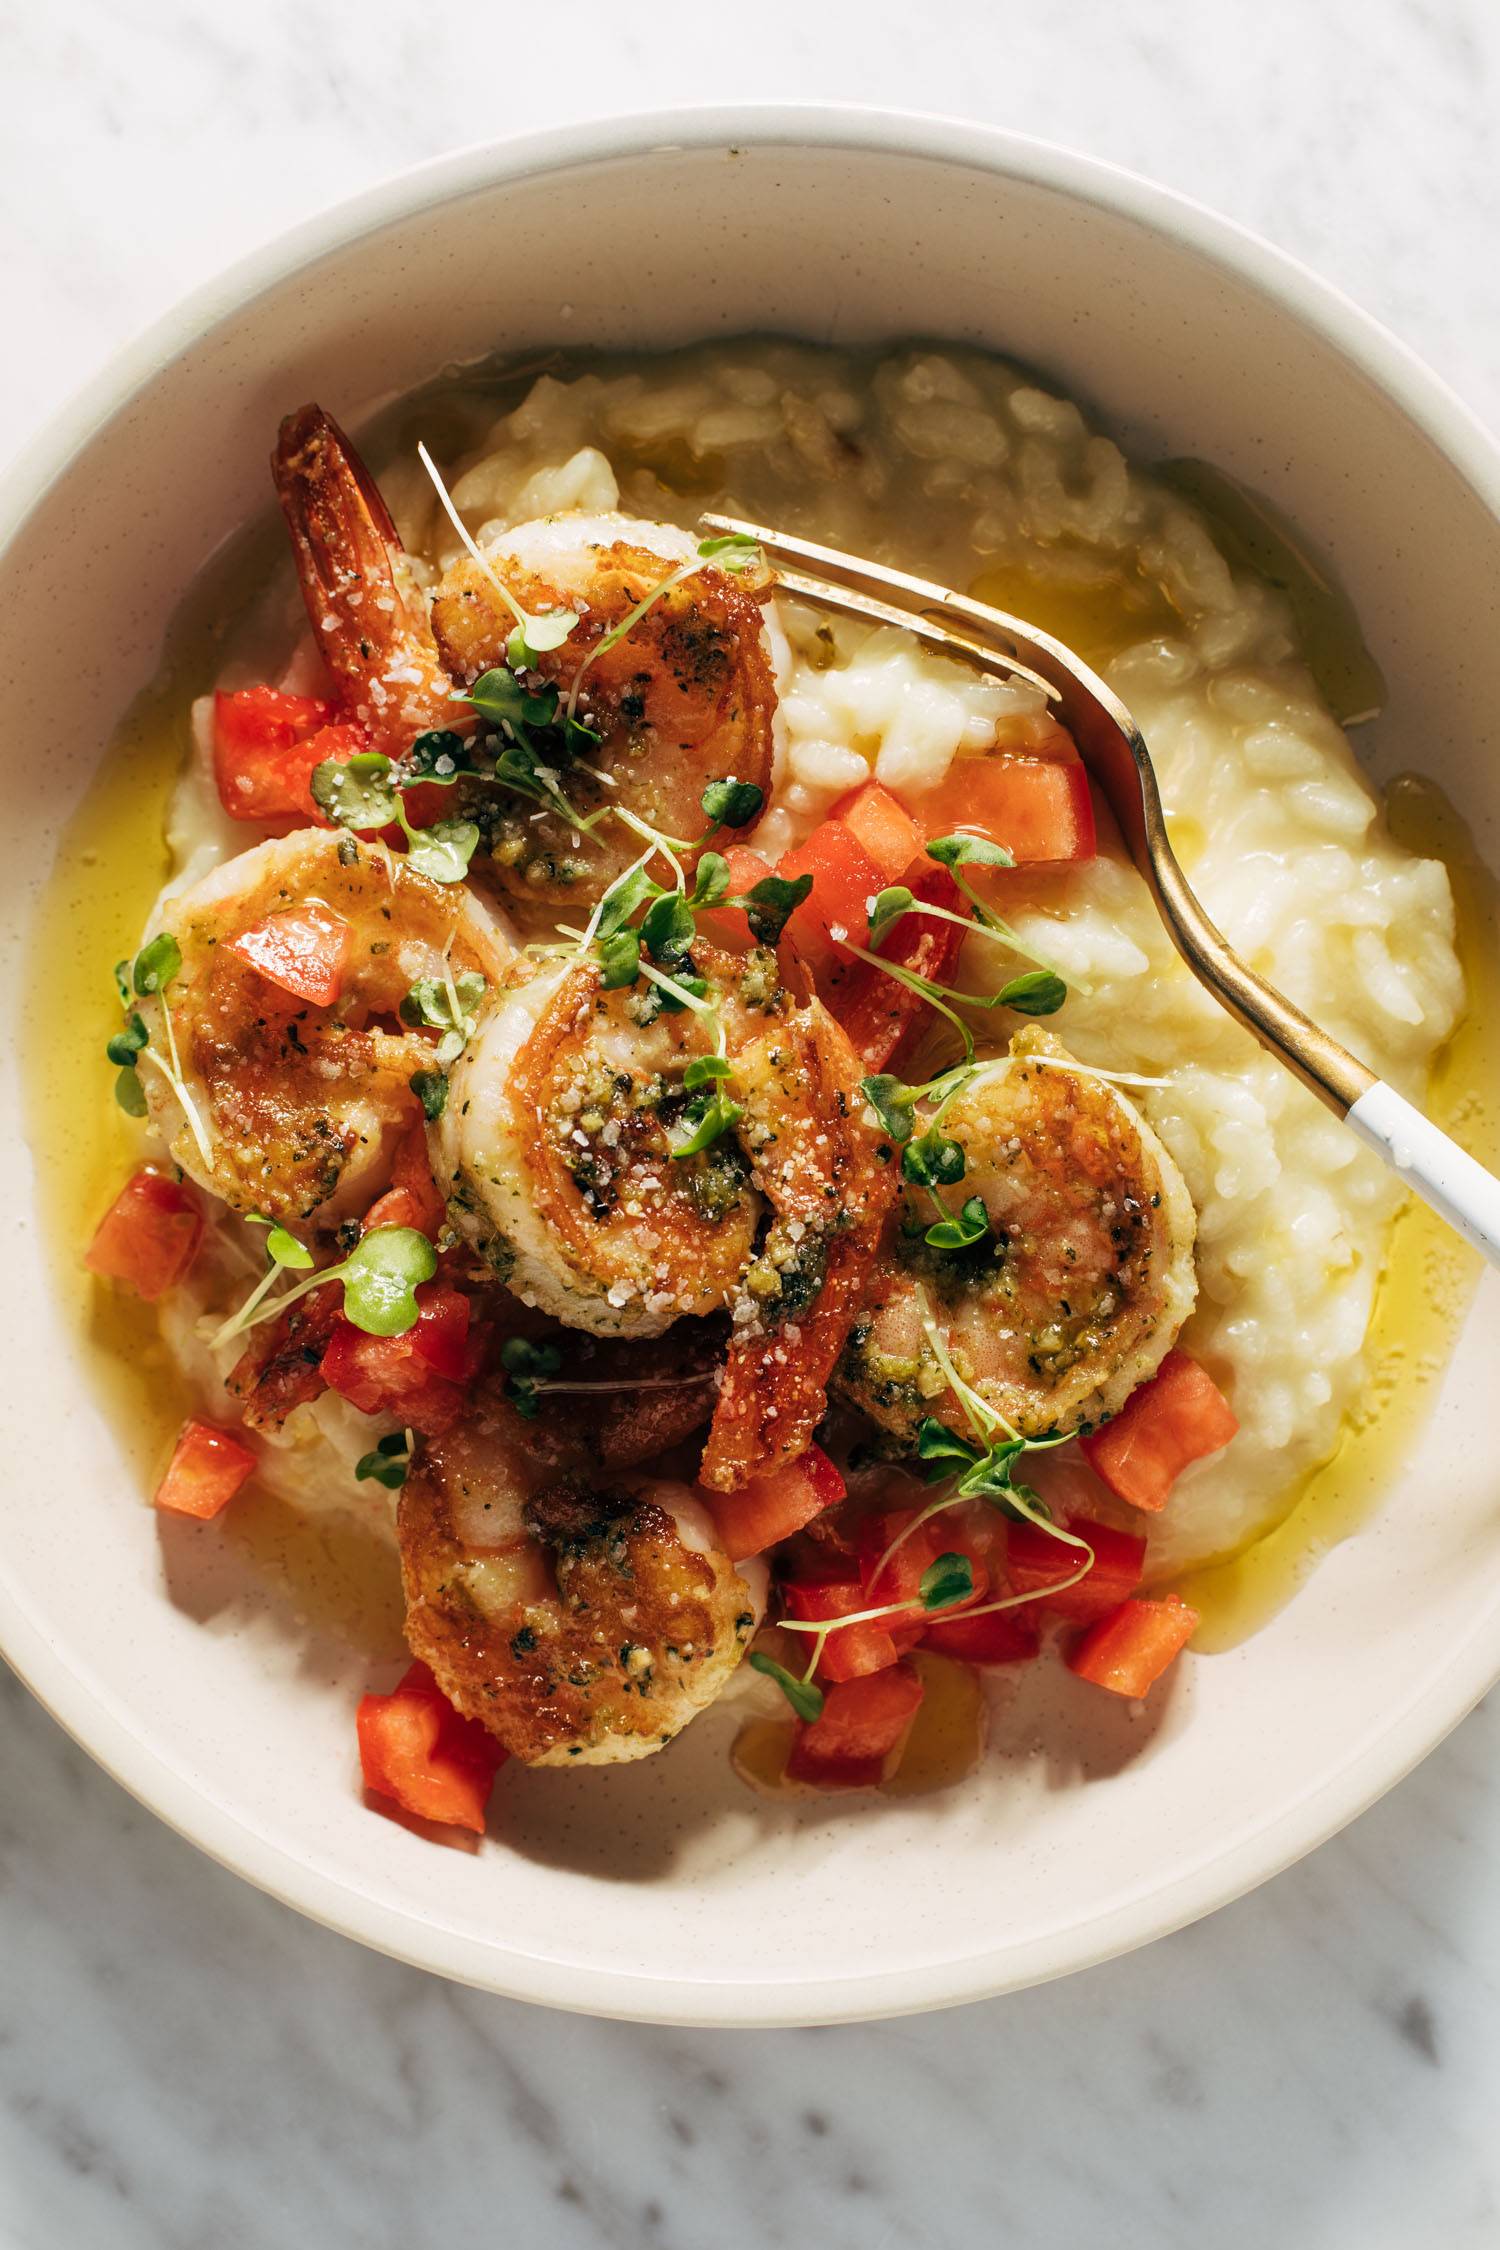 Pesto shrimp with risotto and a fork in a bowl